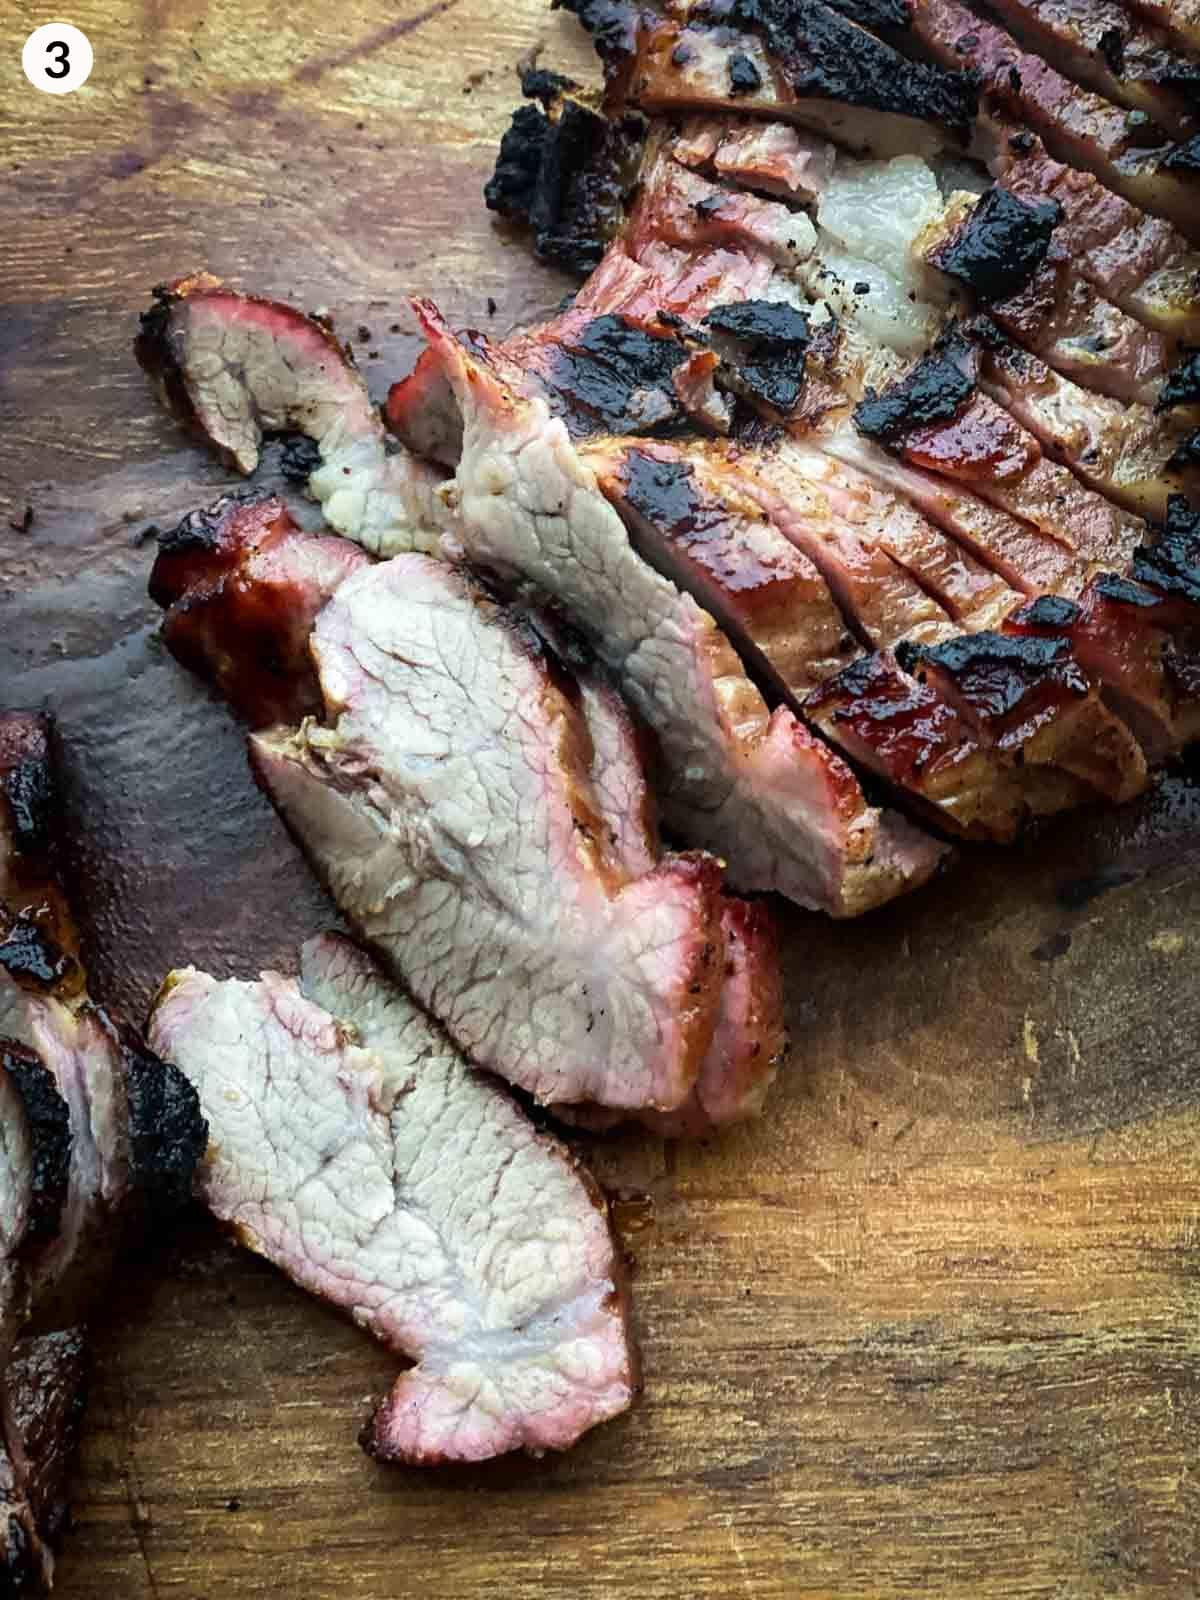 slices of grilled pork cut on a wooden chopping board